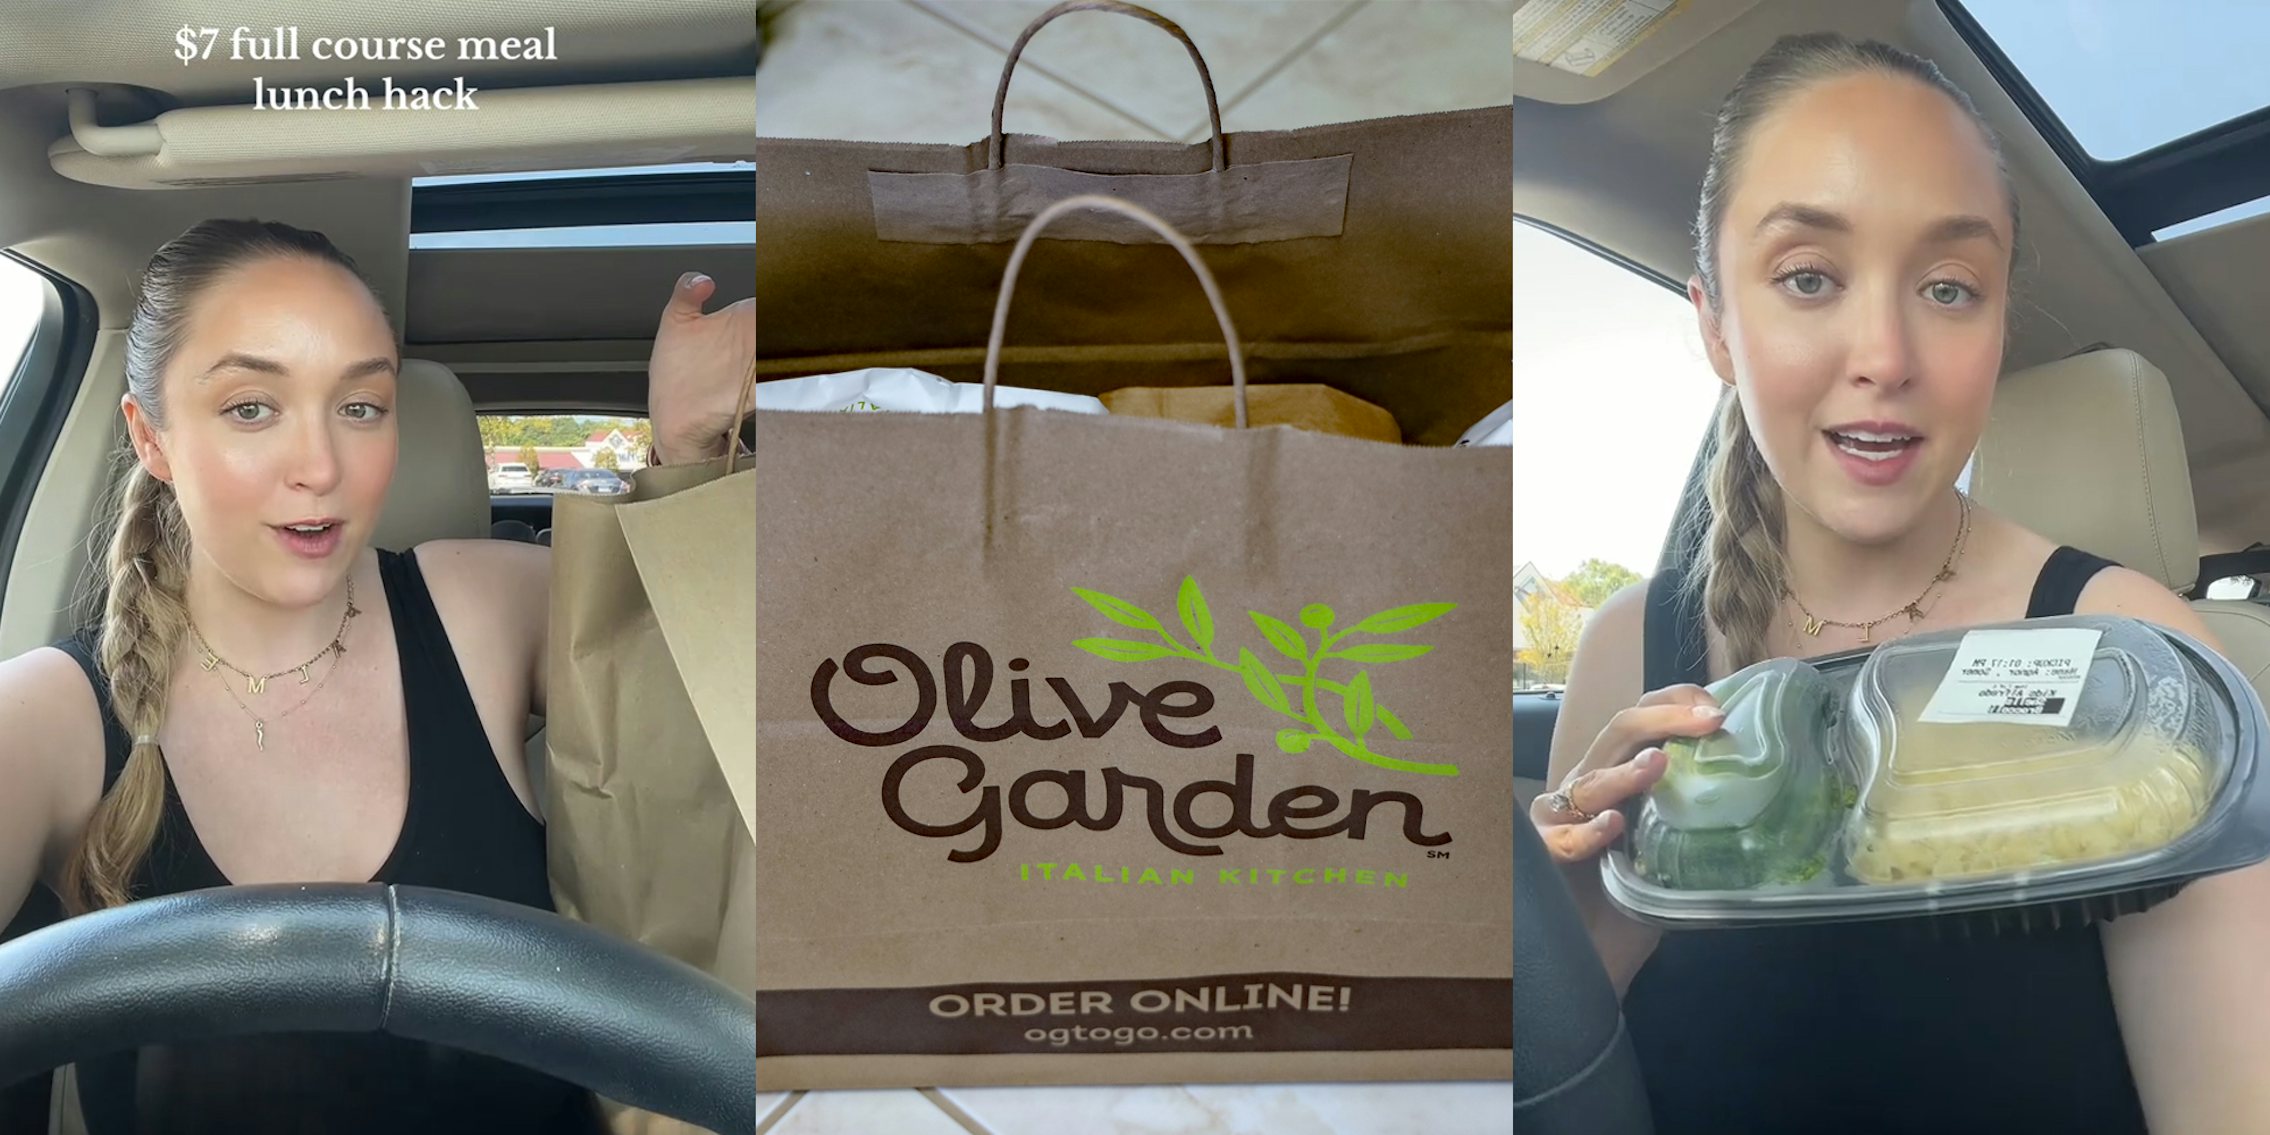 Olive Garden customer speaking in car with food and caption '$7 full course meal lunch hack (l) Olive Garden branded bag on floor (c) Olive Garden customer speaking in car with food (r)